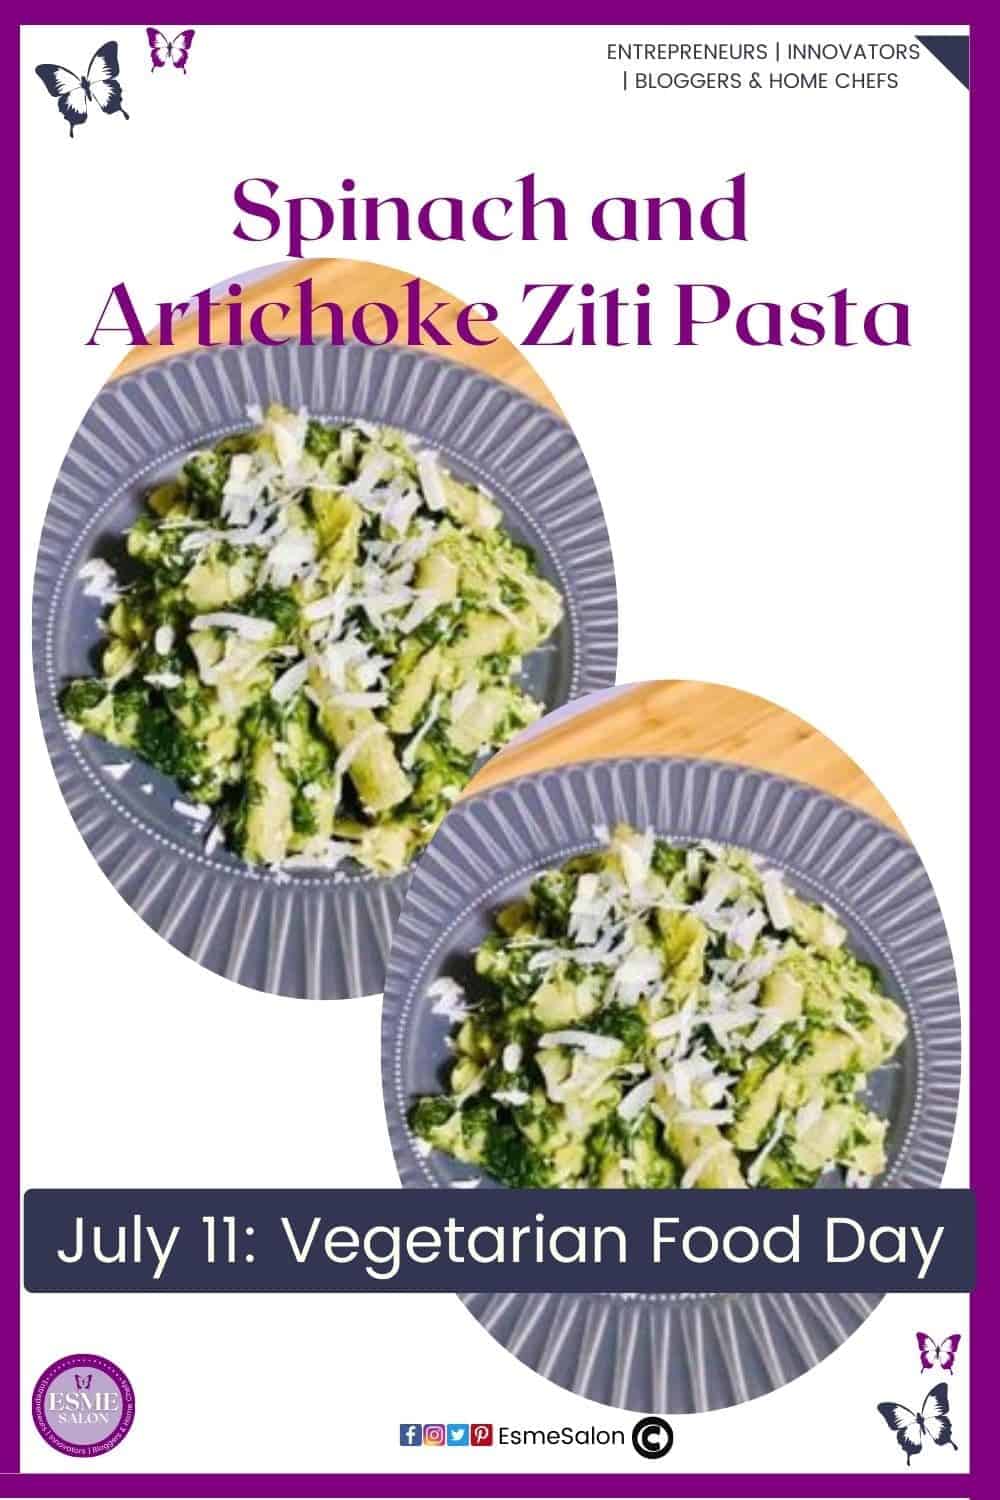 an image of a blue plate filled with Spinach & Artichoke Ziti Pasta